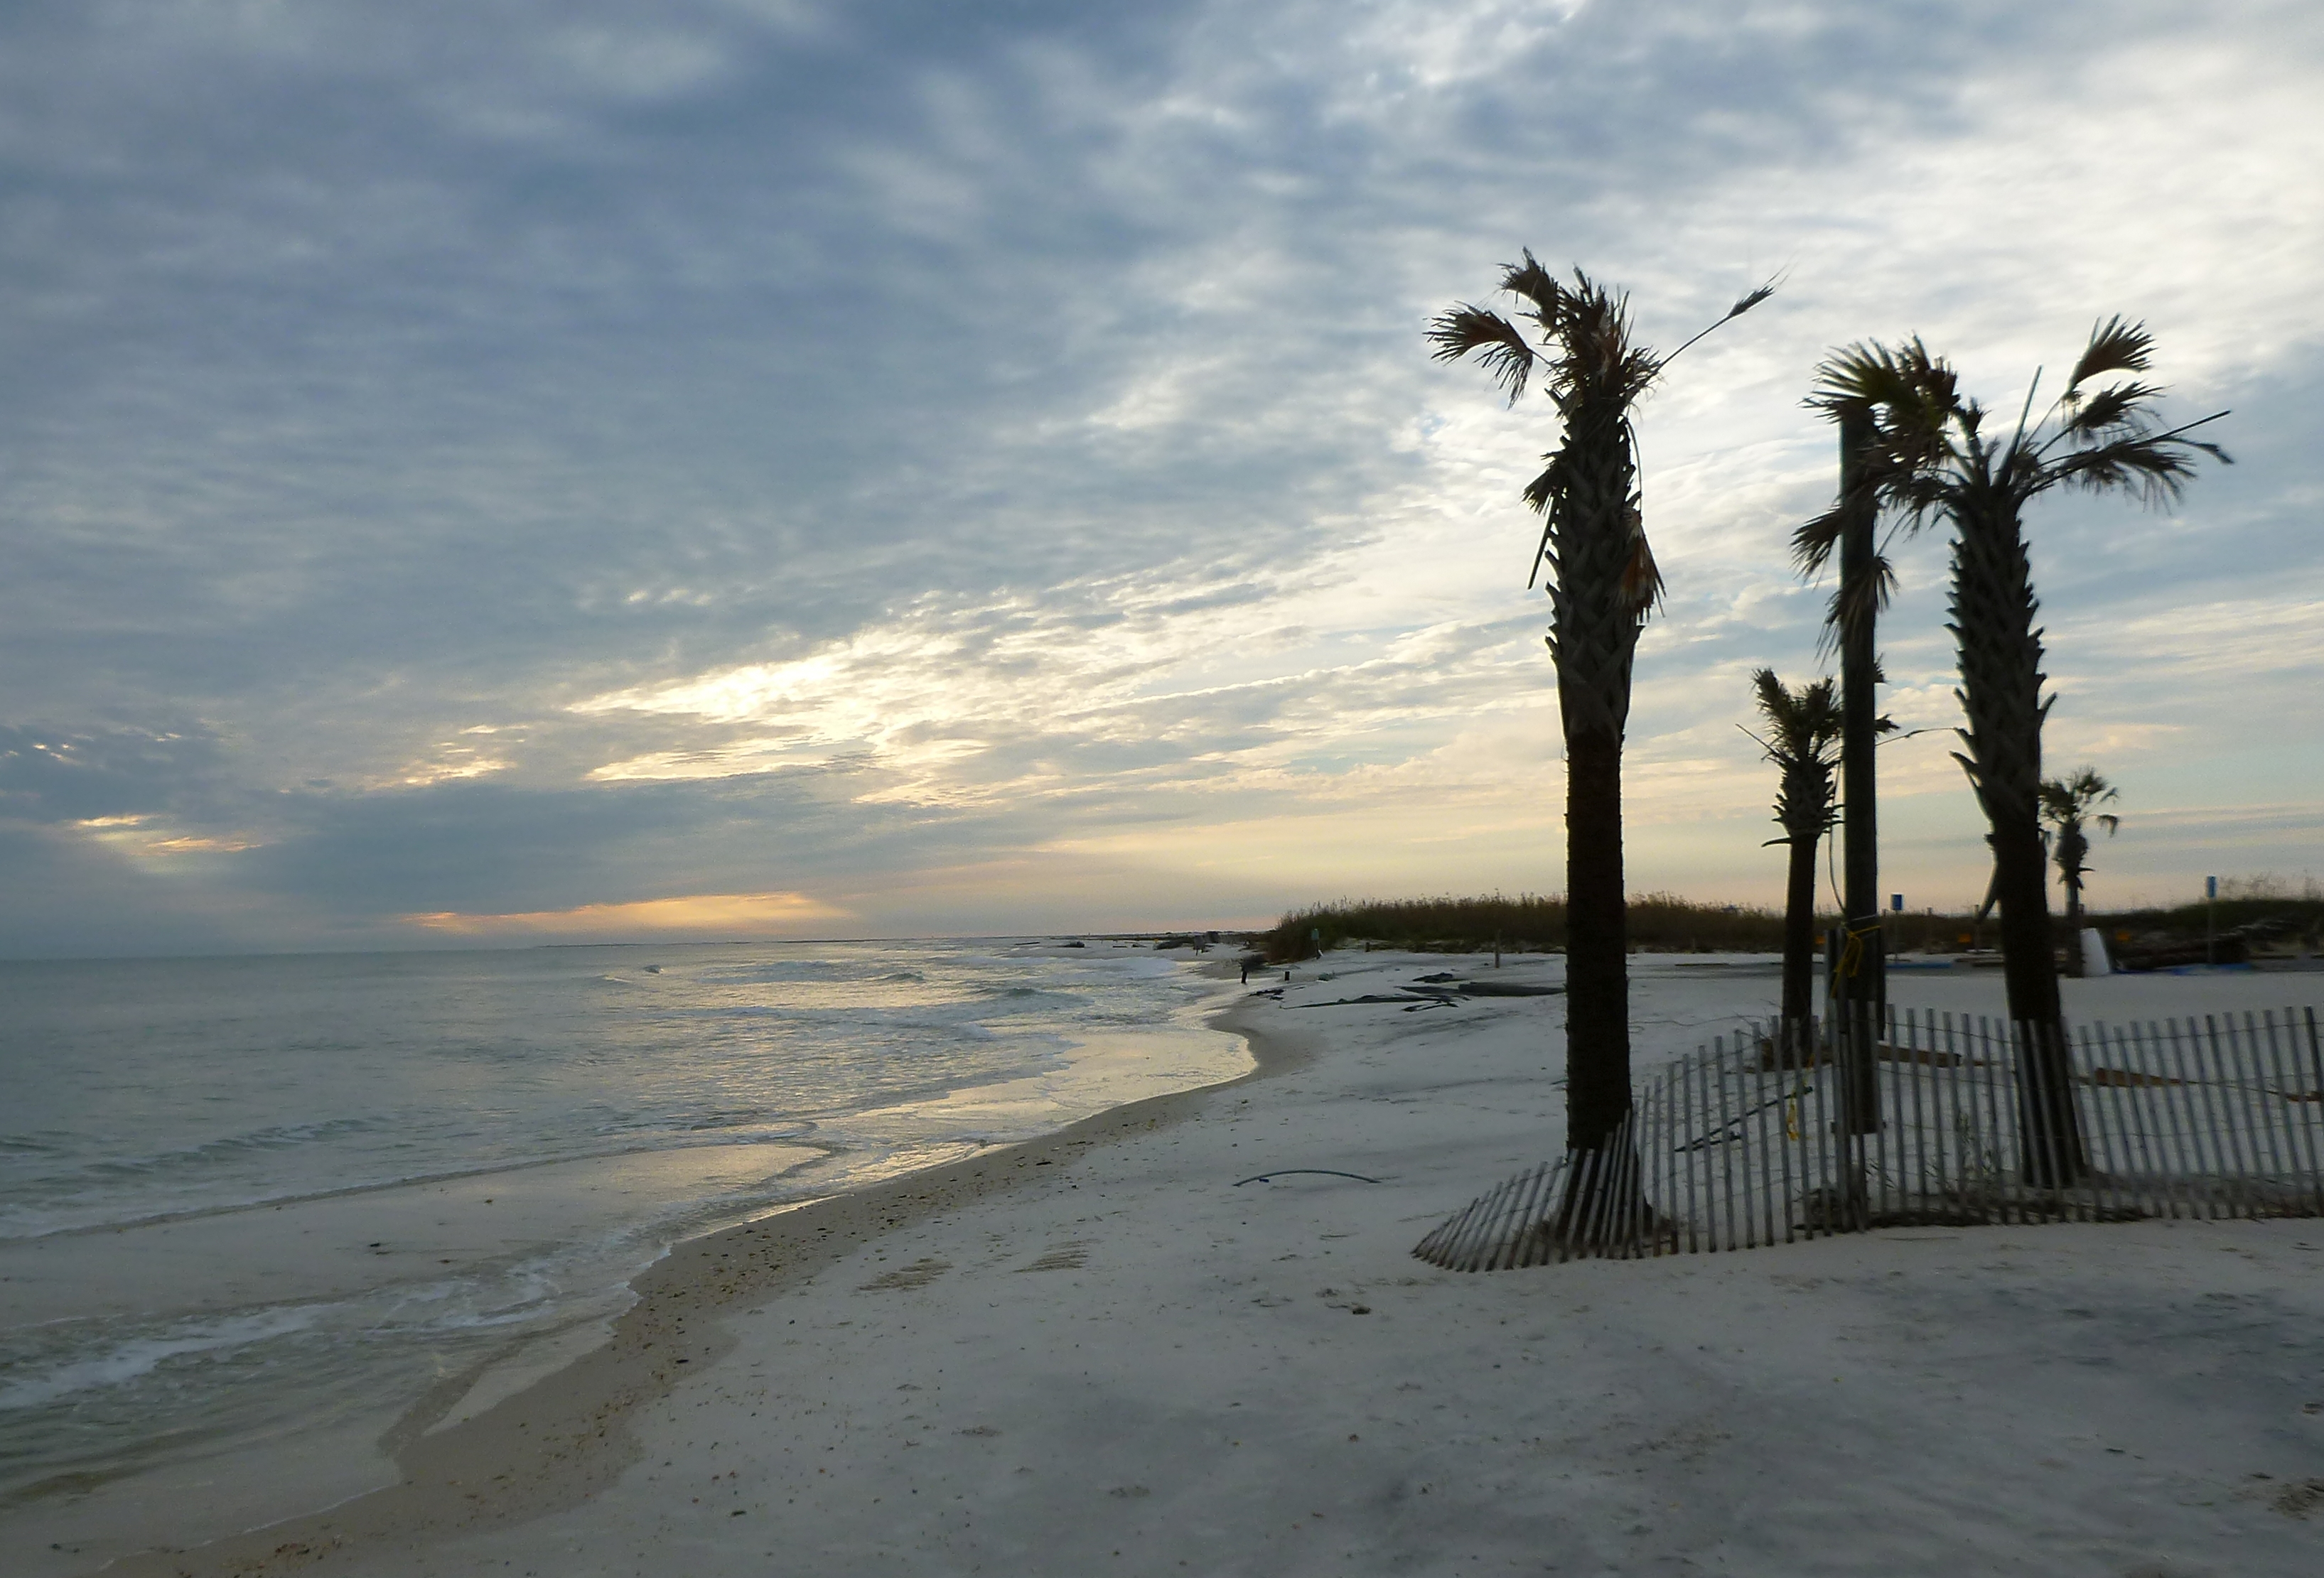 Photo of eroded beach at sunset with fence and palm trees.